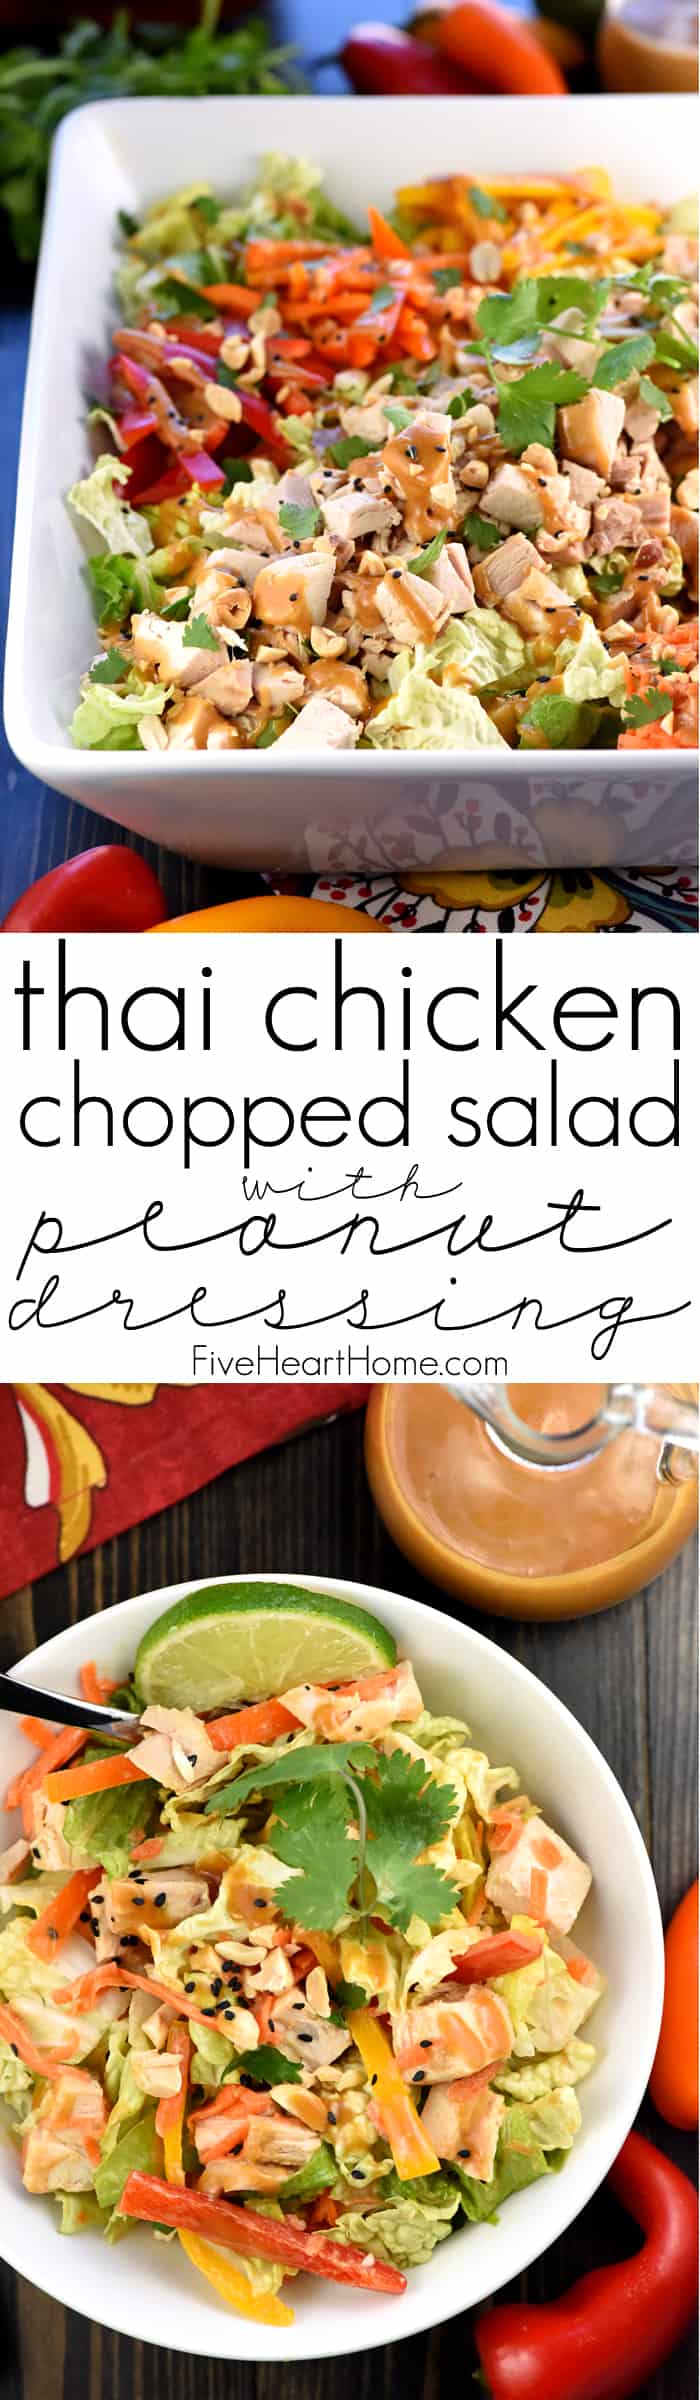 Thai-Inspired Chicken Chopped Salad with Peanut Dressing ~ exploding with the contrasting flavors and textures of crunchy Napa cabbage, juicy chicken, colorful peppers, sweet carrots, salty peanuts, and fresh cilantro! | FiveHeartHome.com via @fivehearthome